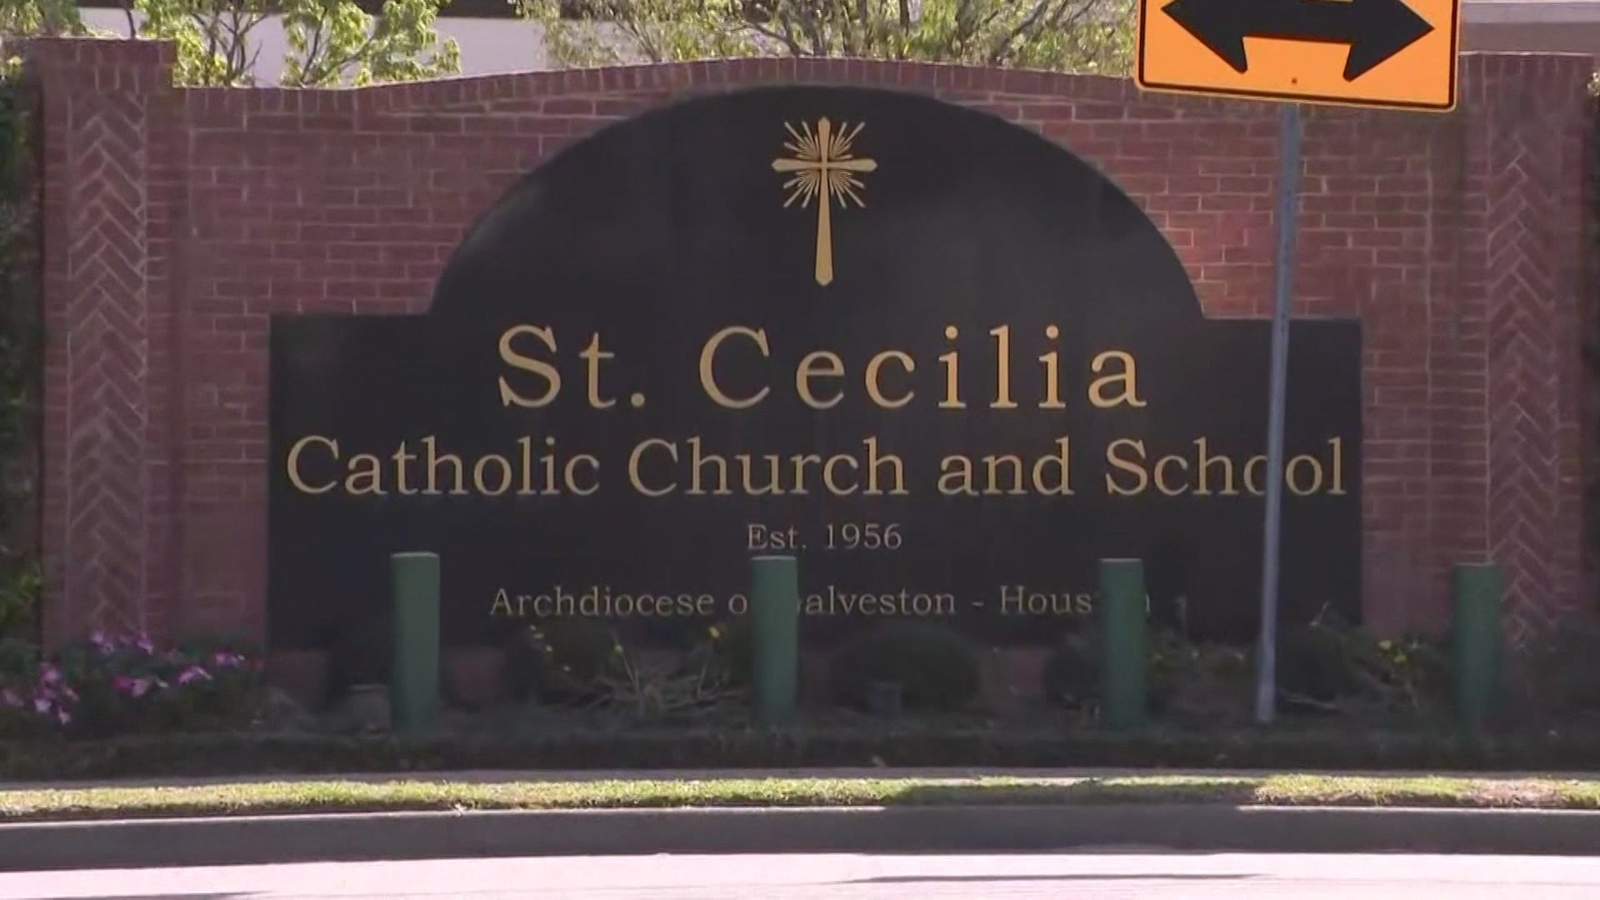 Parishioners at St. Cecilia Catholic church react to positive coronavirus patient who attended Mass